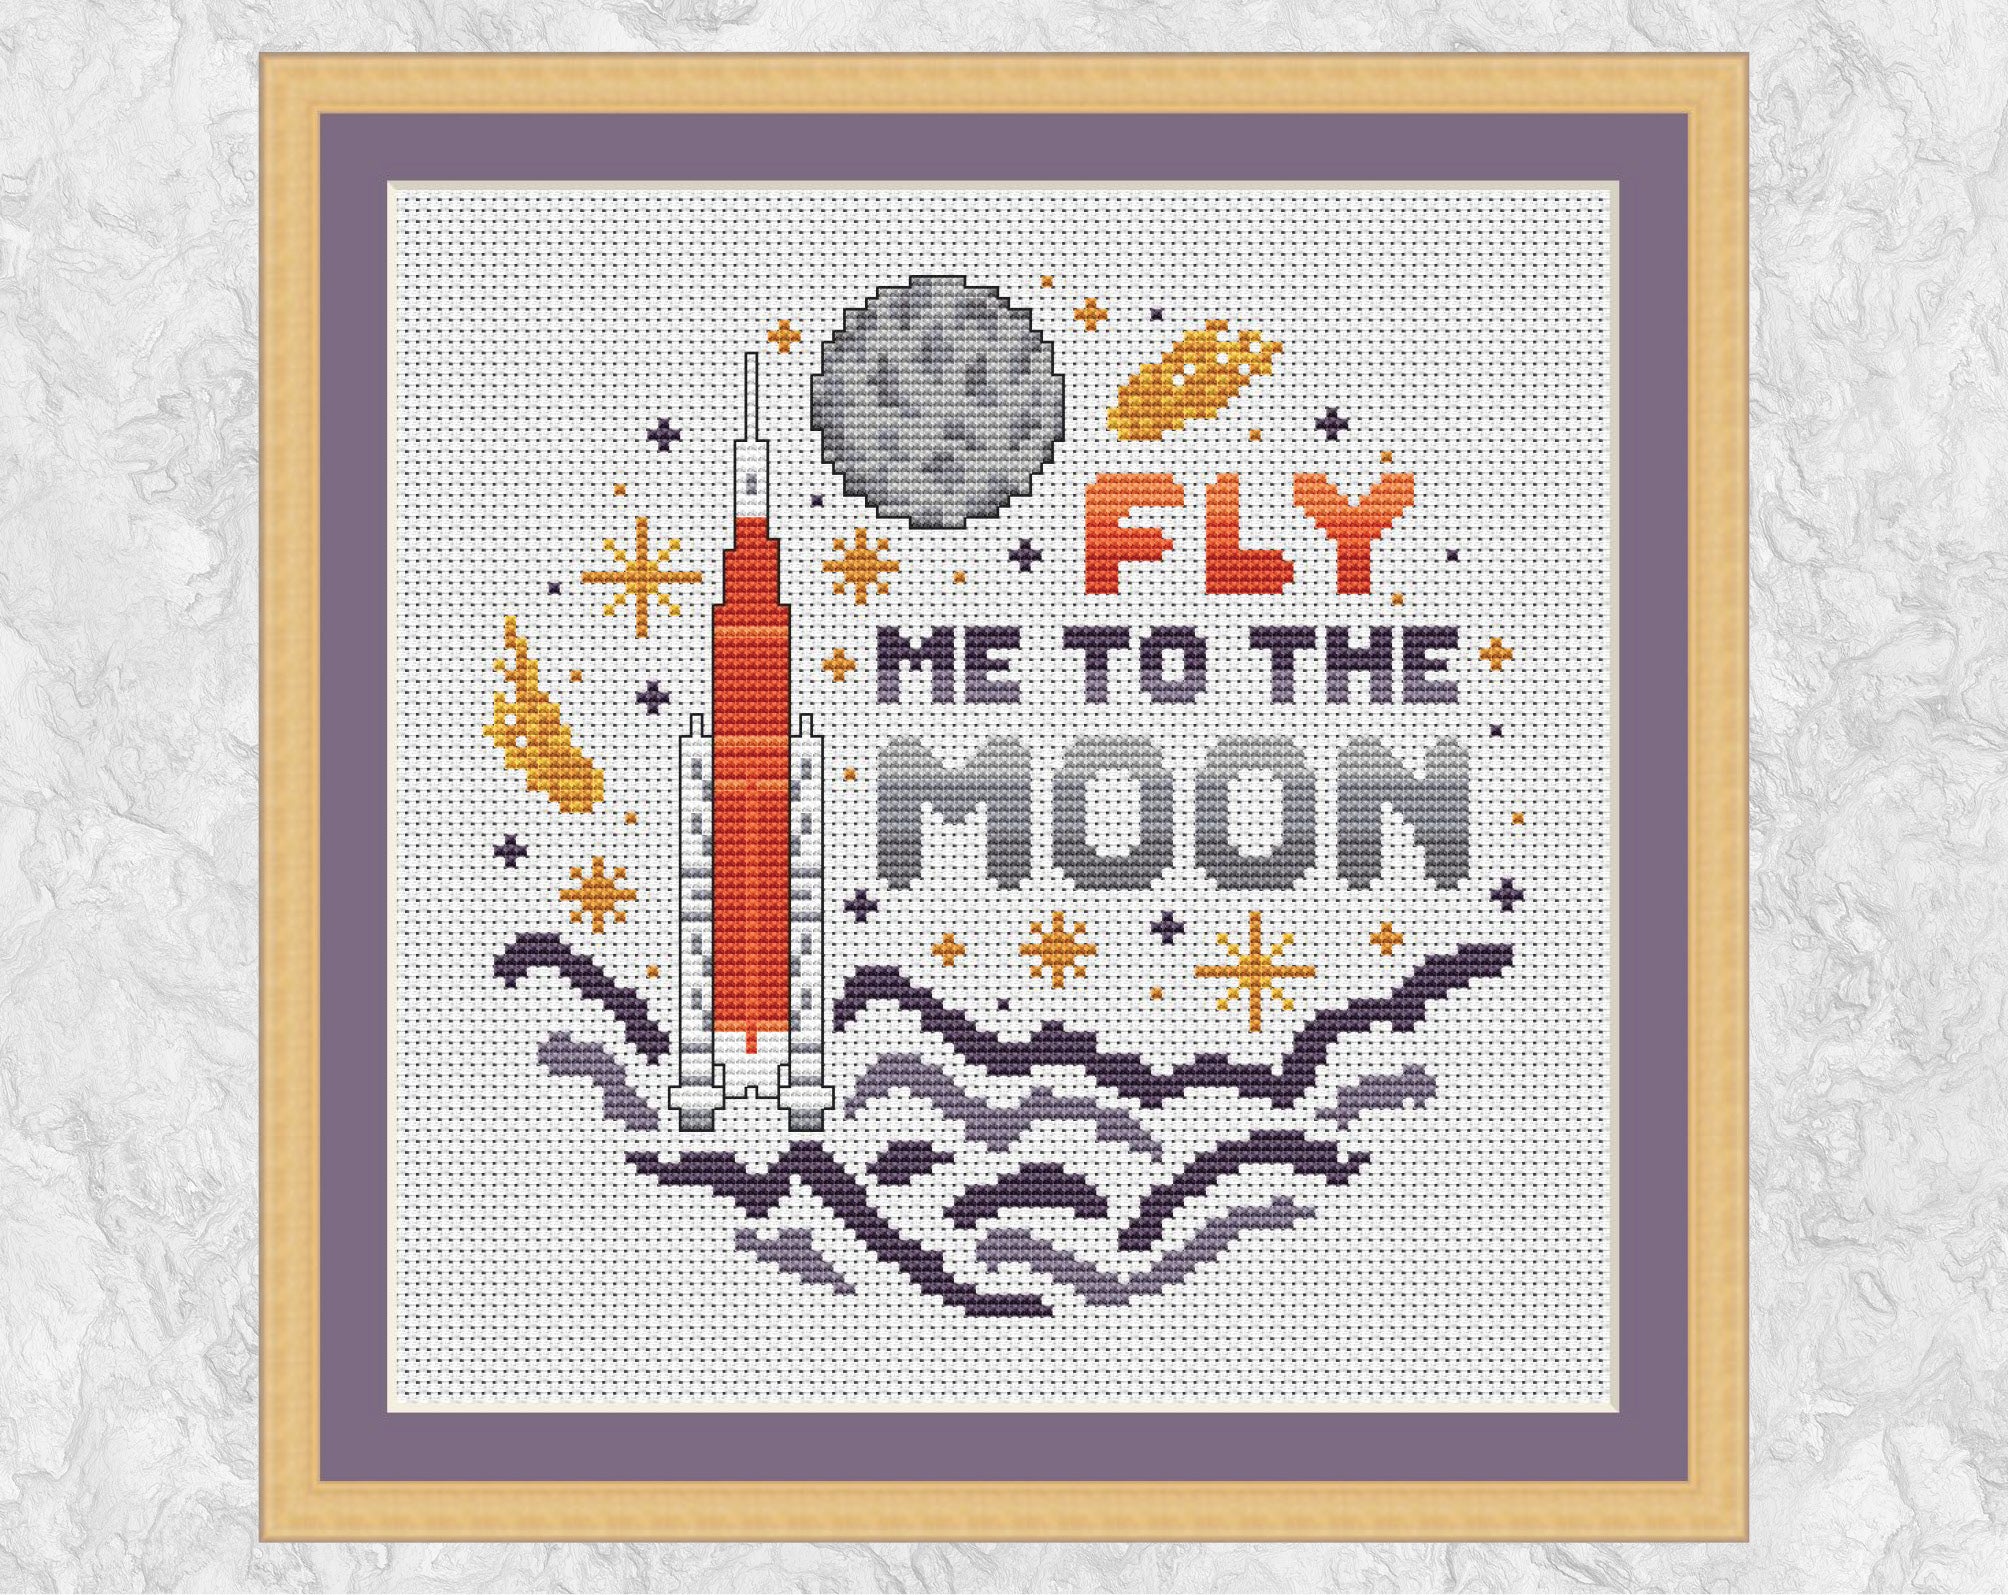 Fly Me To The Moon cross stitch pattern. Cartoon of Artemis rocket, Moon and stars. Shown in frame.